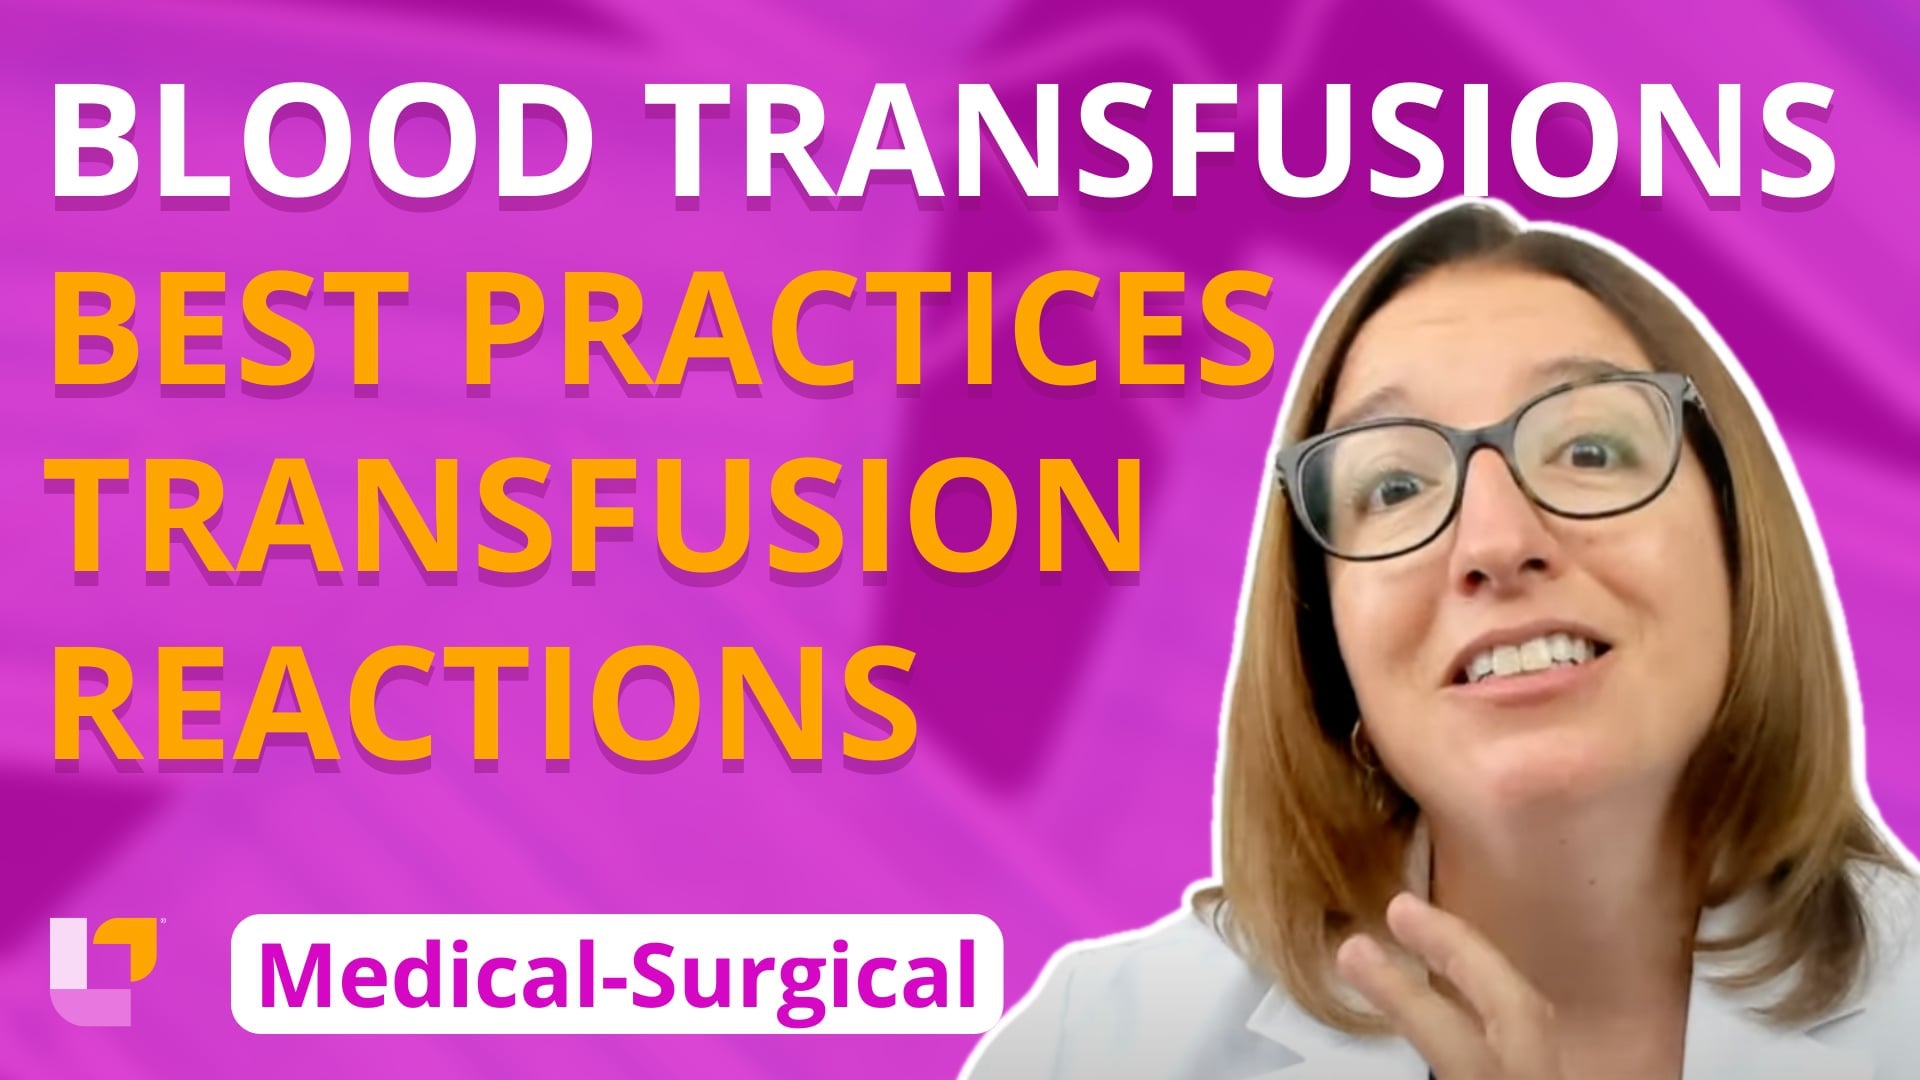 Med-Surg - Cardiovascular System, part 21: Blood Transfusions - LevelUpRN